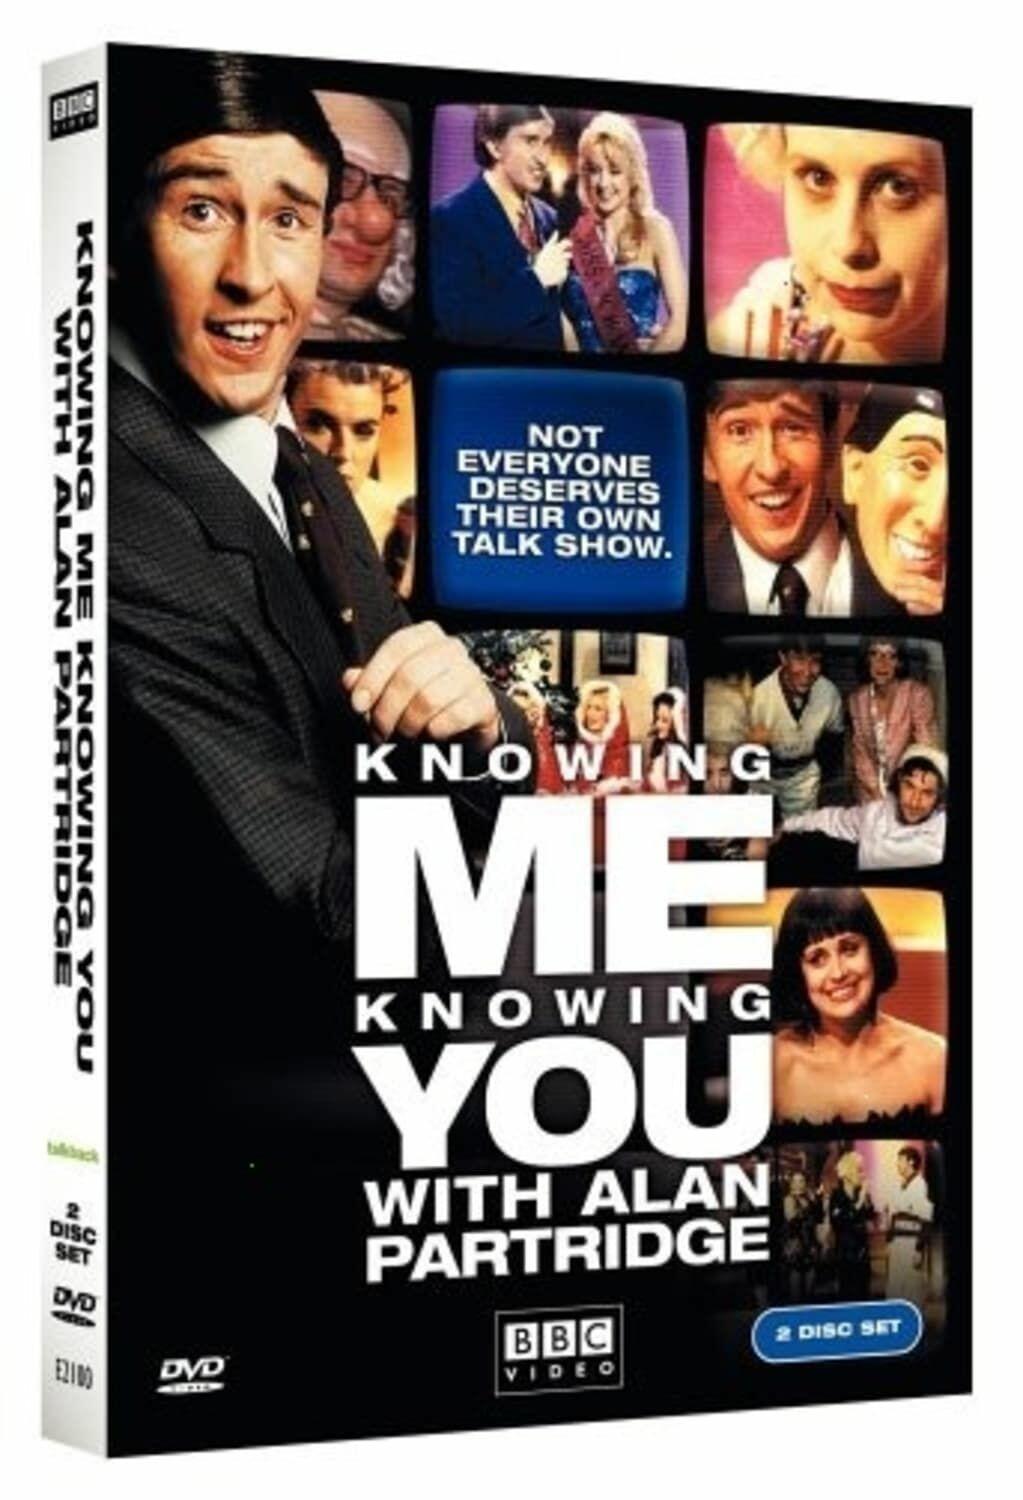 Knowing Me Knowing You with Alan Partridge: The Complete Series (DVD) on MovieShack